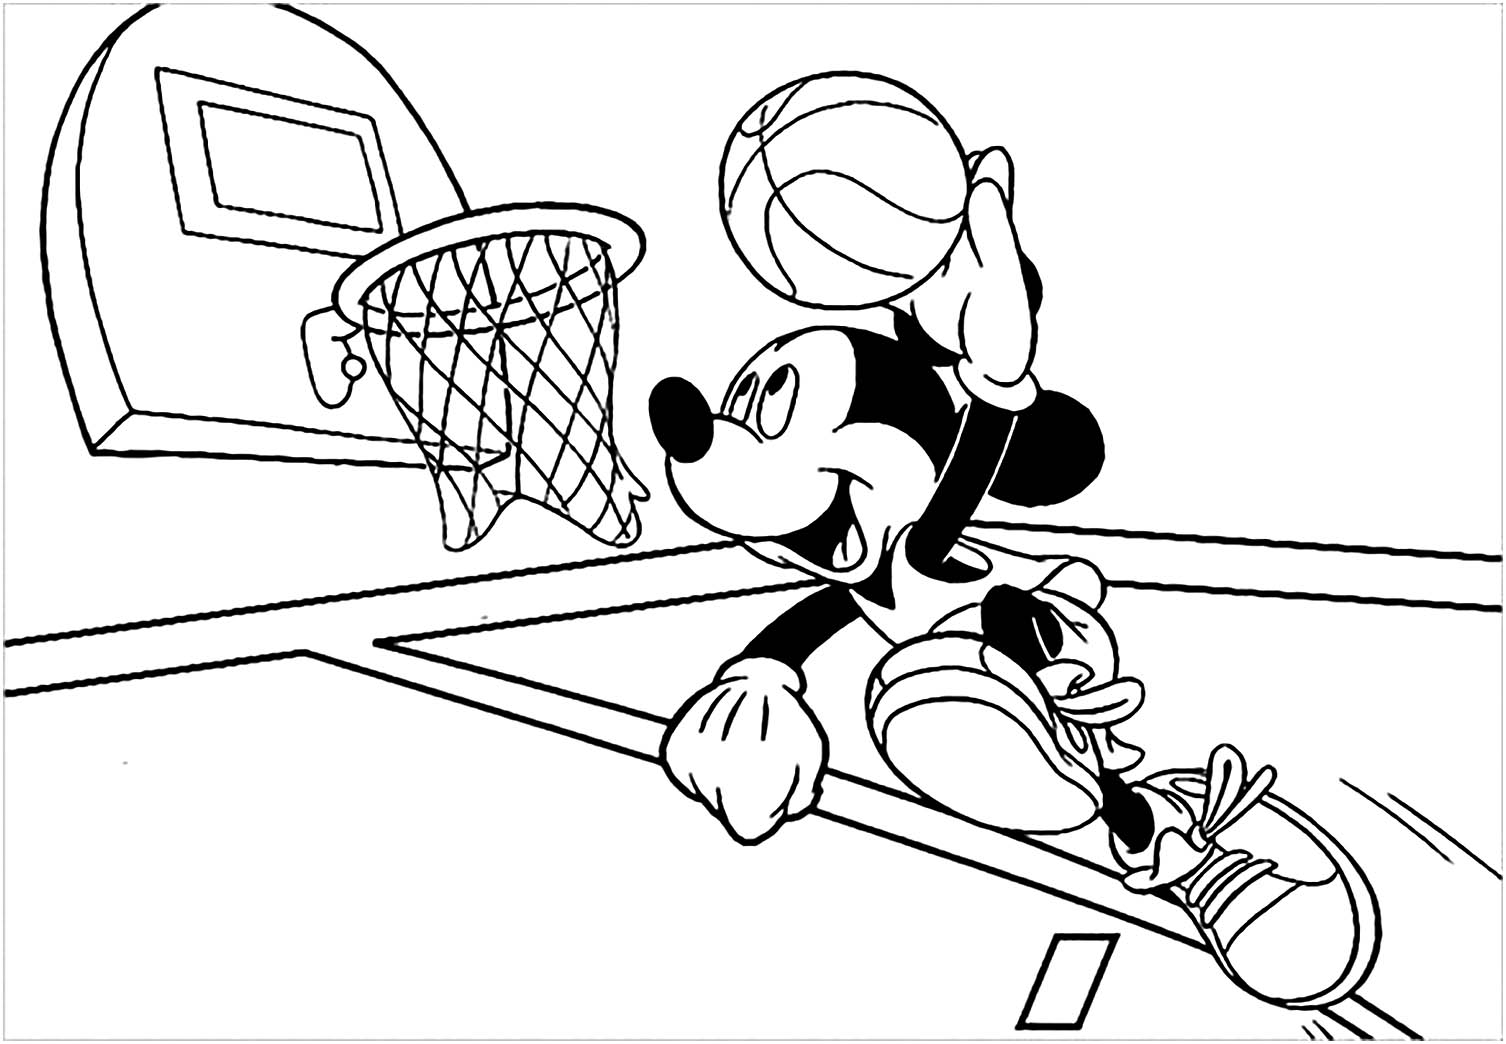 Download Basketball for children - Basketball Kids Coloring Pages